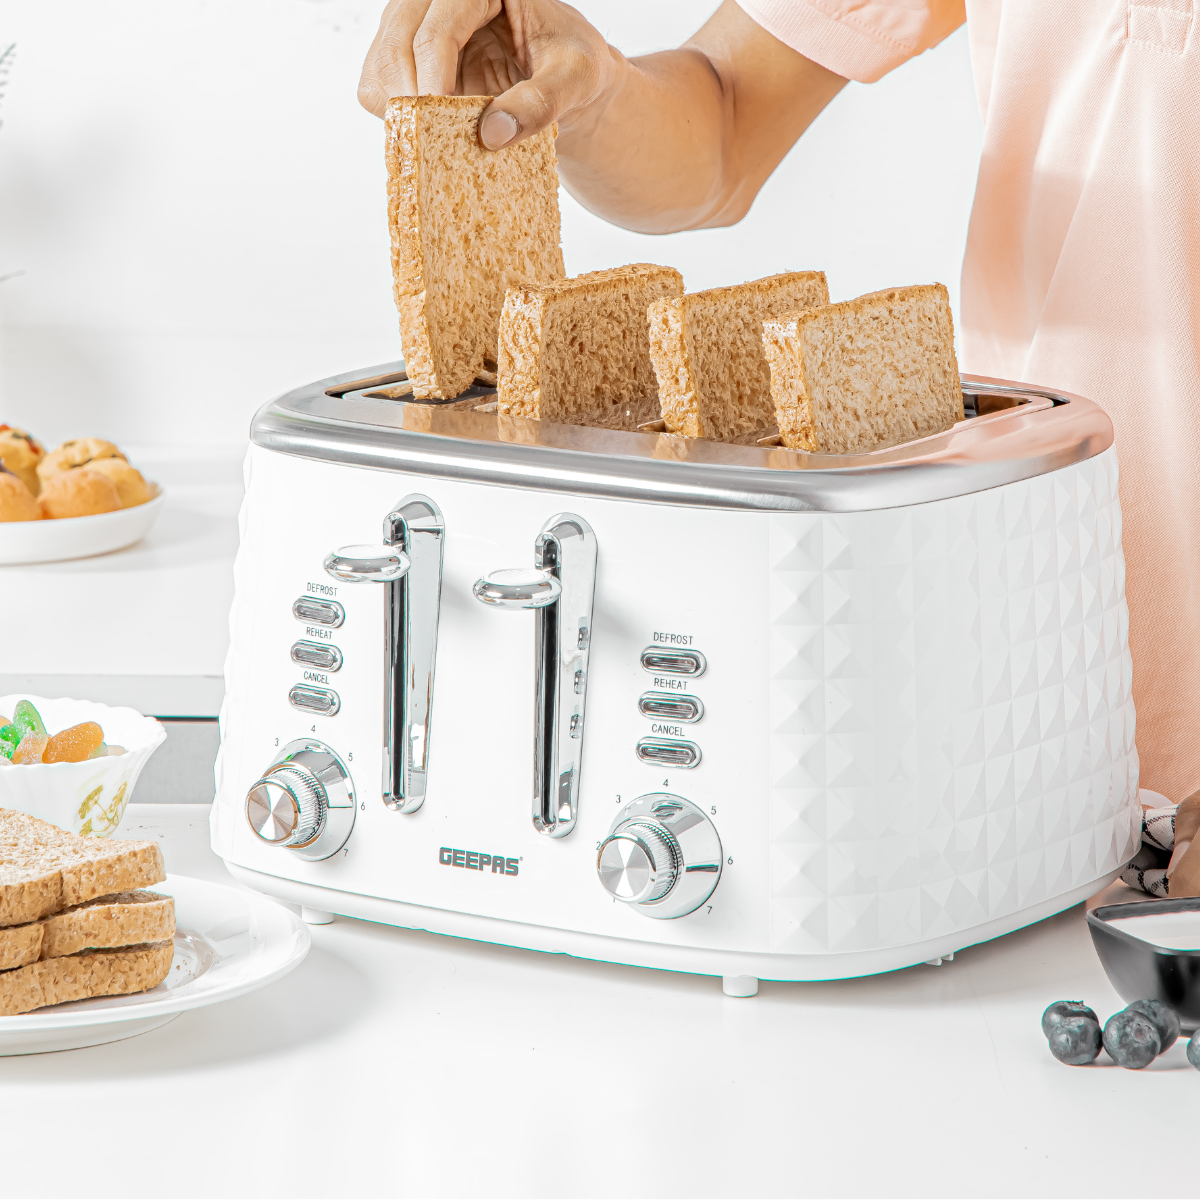 Toasters Unveiled: Different Types and Their Benefits